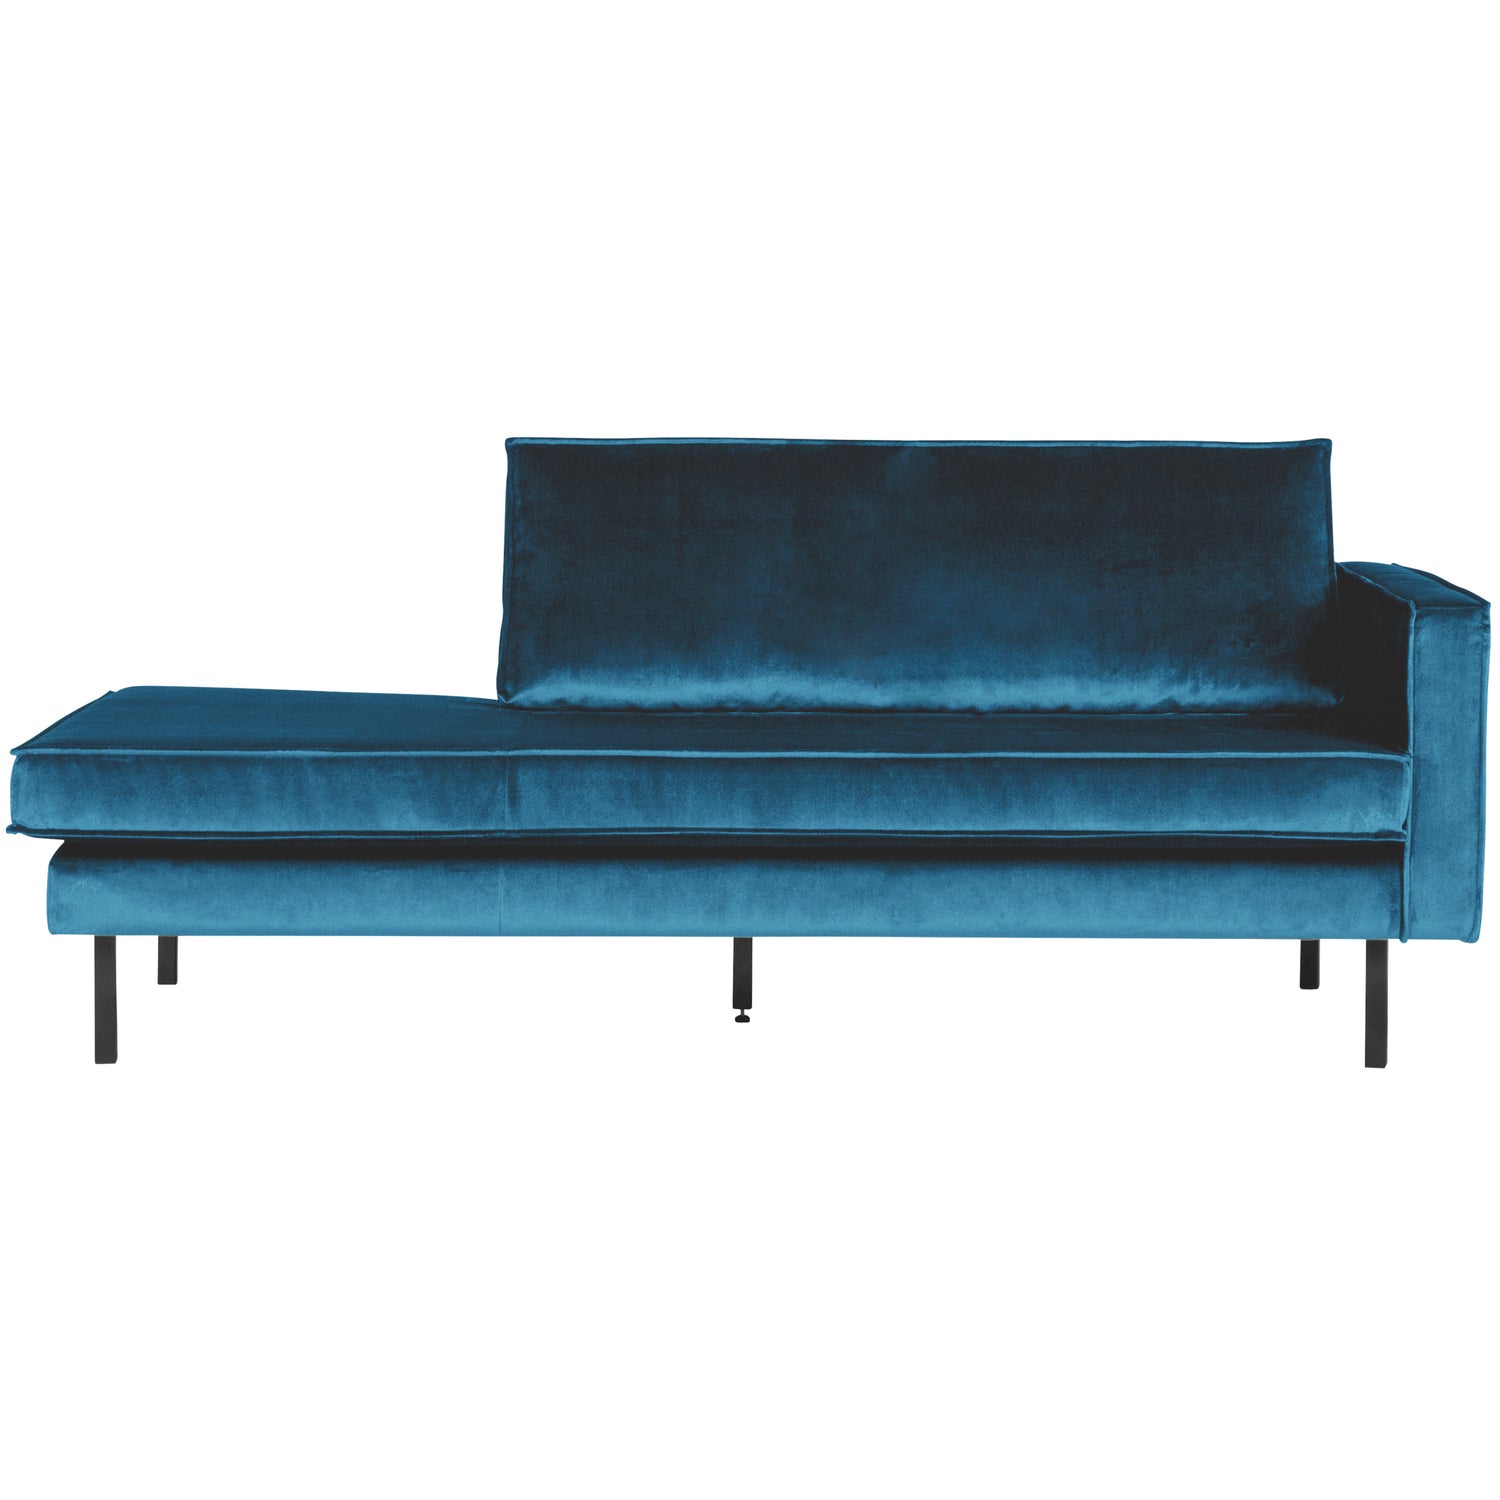 800746-45-01_VS_BP_Rodeo_daybed_right_blue_EA.jpg?auto=webp&format=png&width=2000&height=2000